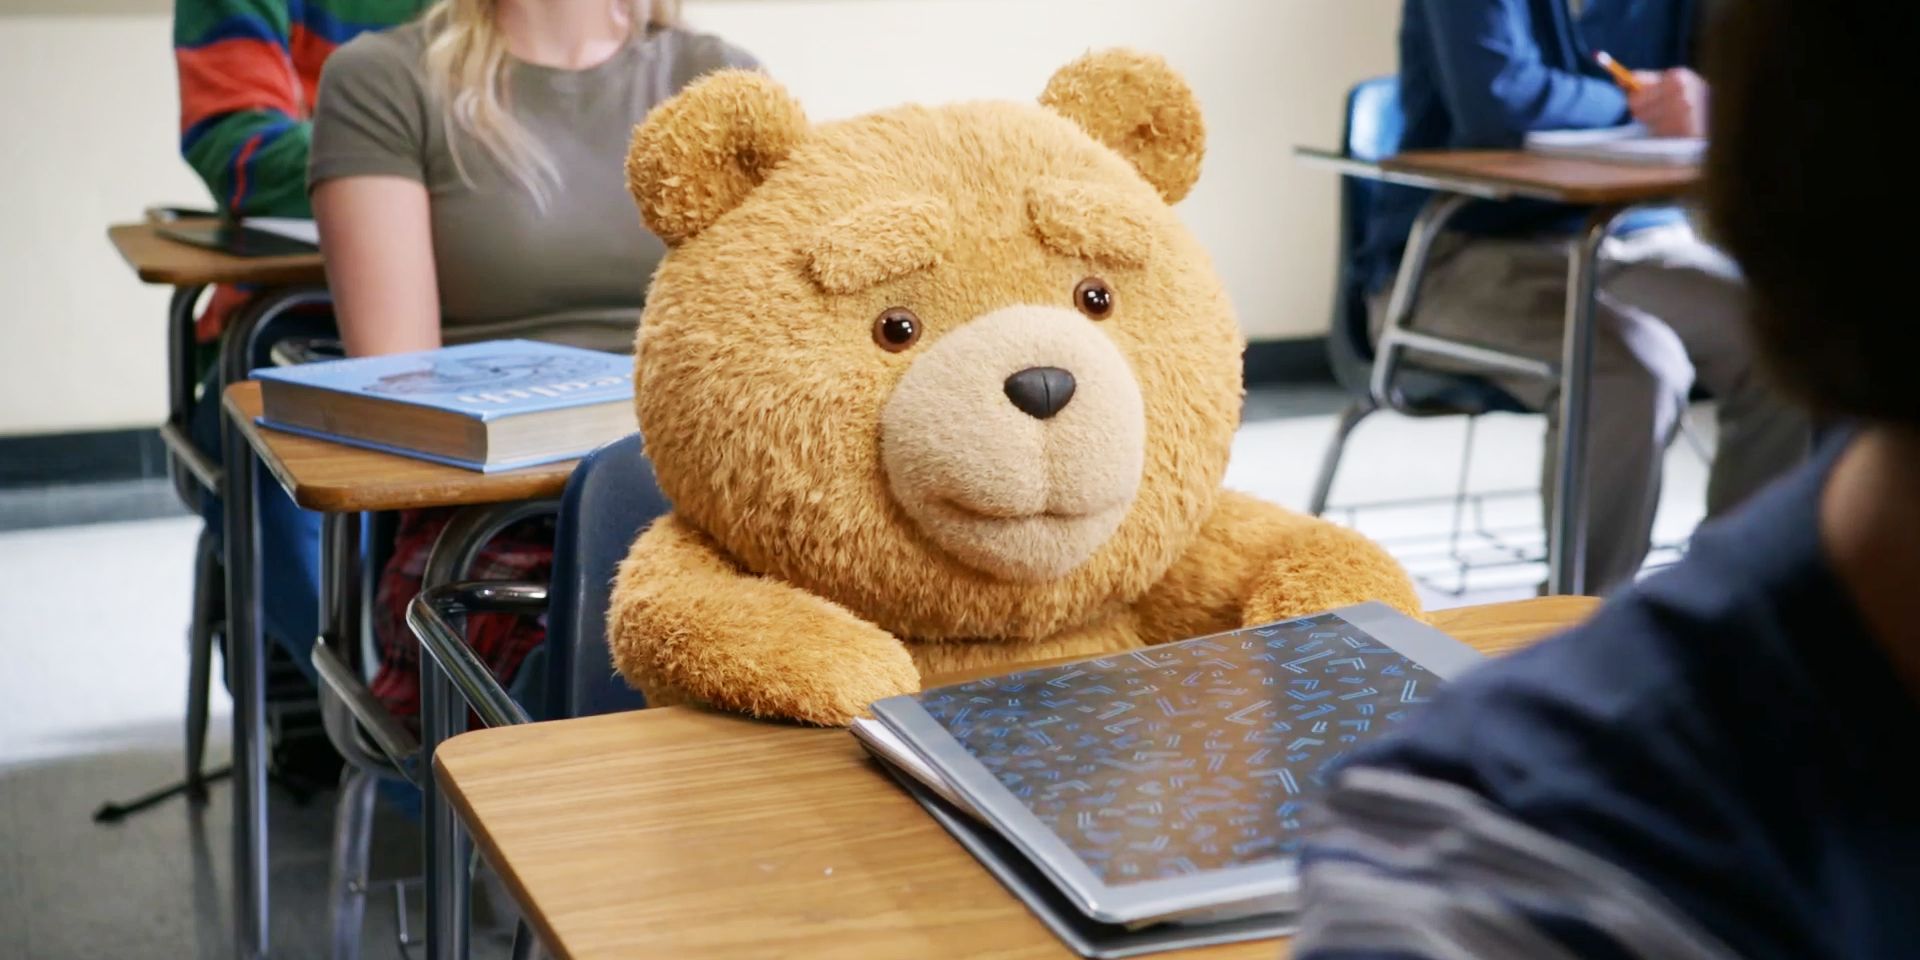 Ted the bear smiling as he sits at his desk in Ted season 1, episode 7